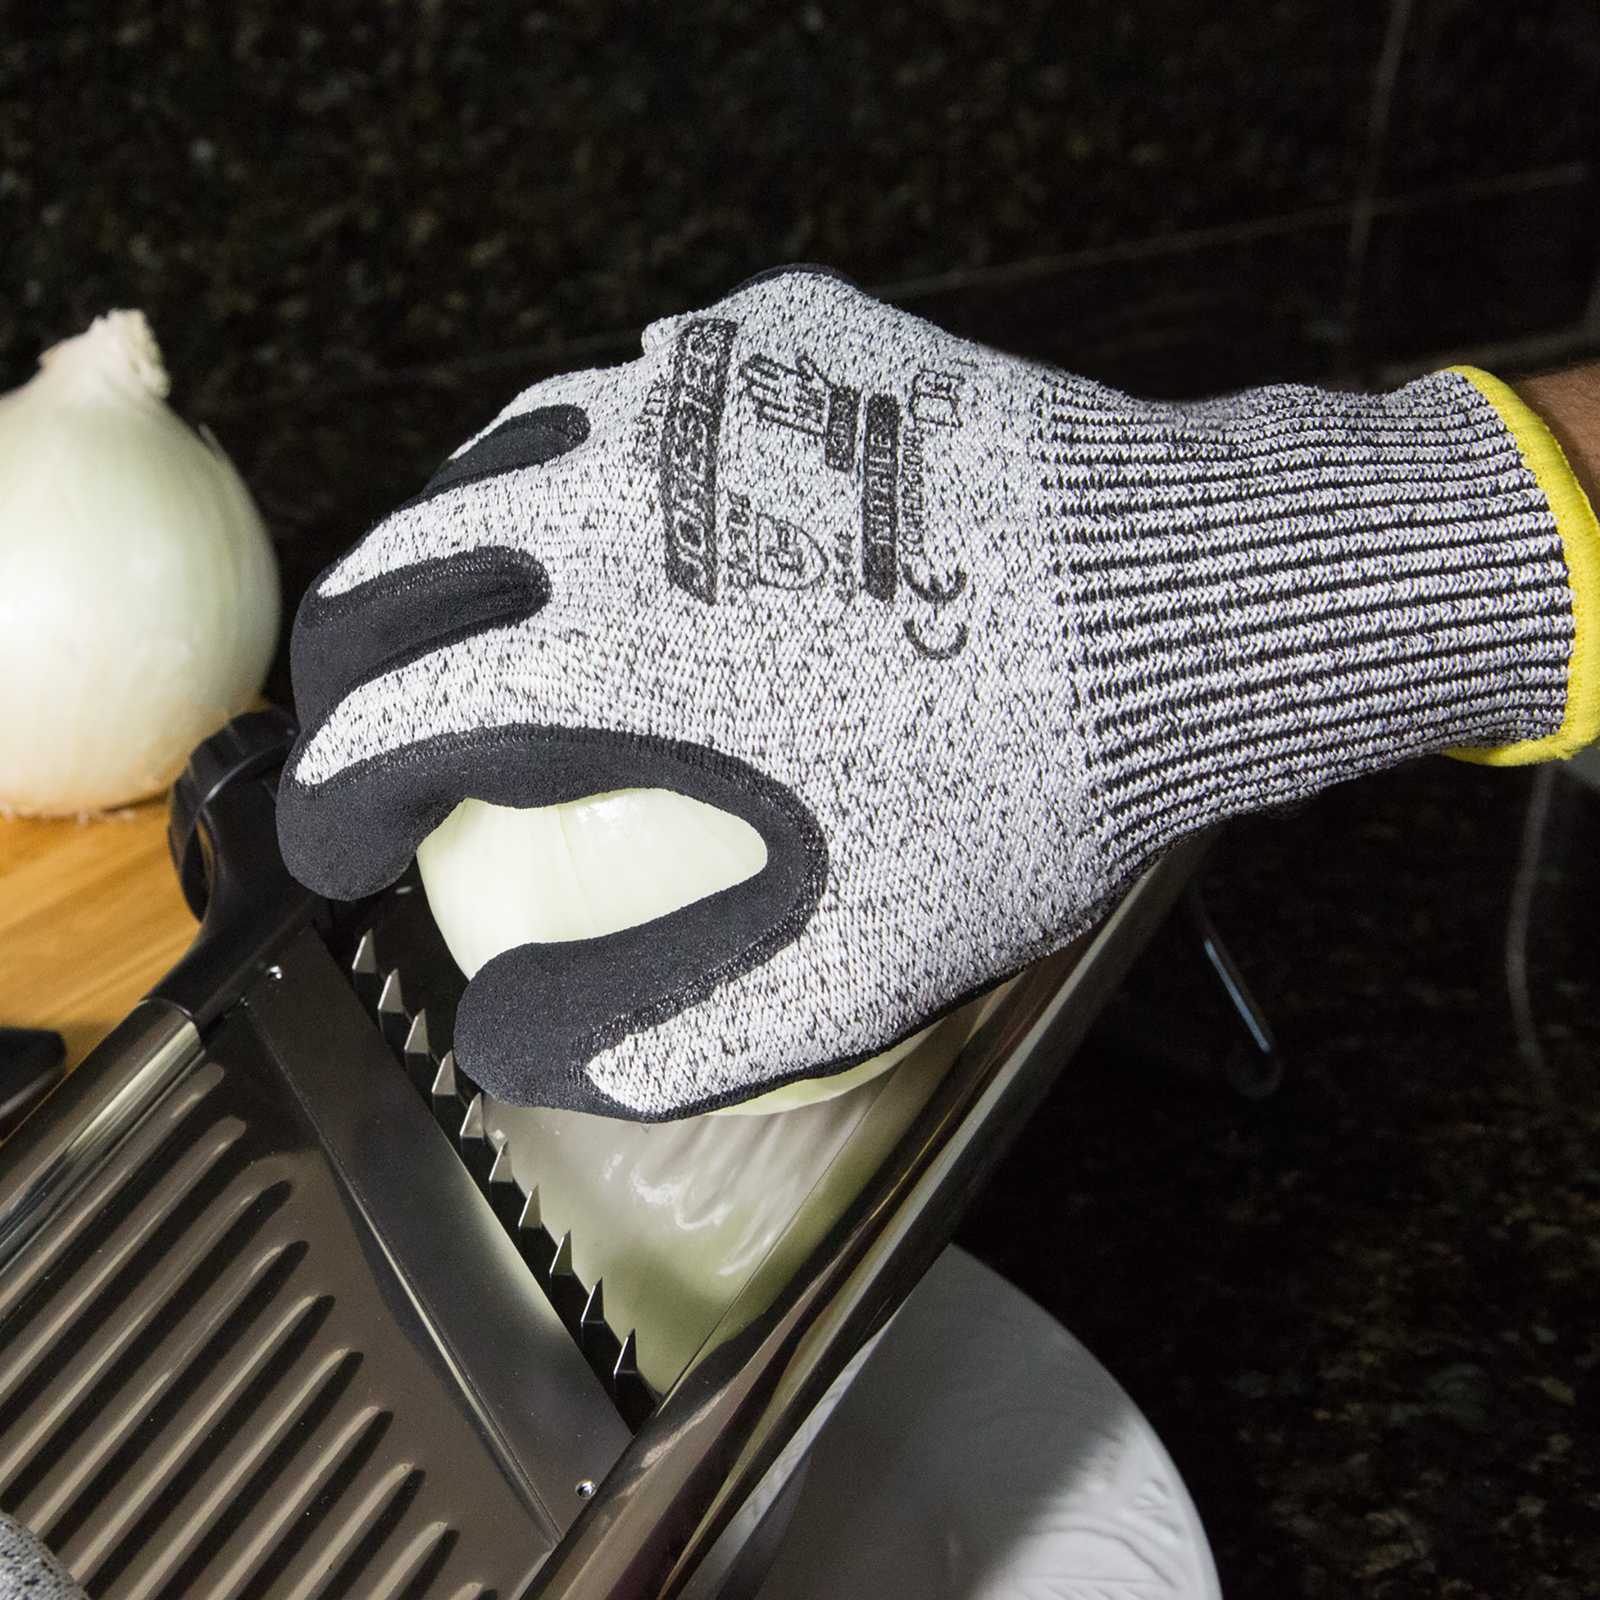 Hands of a person wearing the cut resistant JORESTECH black safety work gloves with nitrile dipped palm while cutting an onion with a silver metal blades slicer